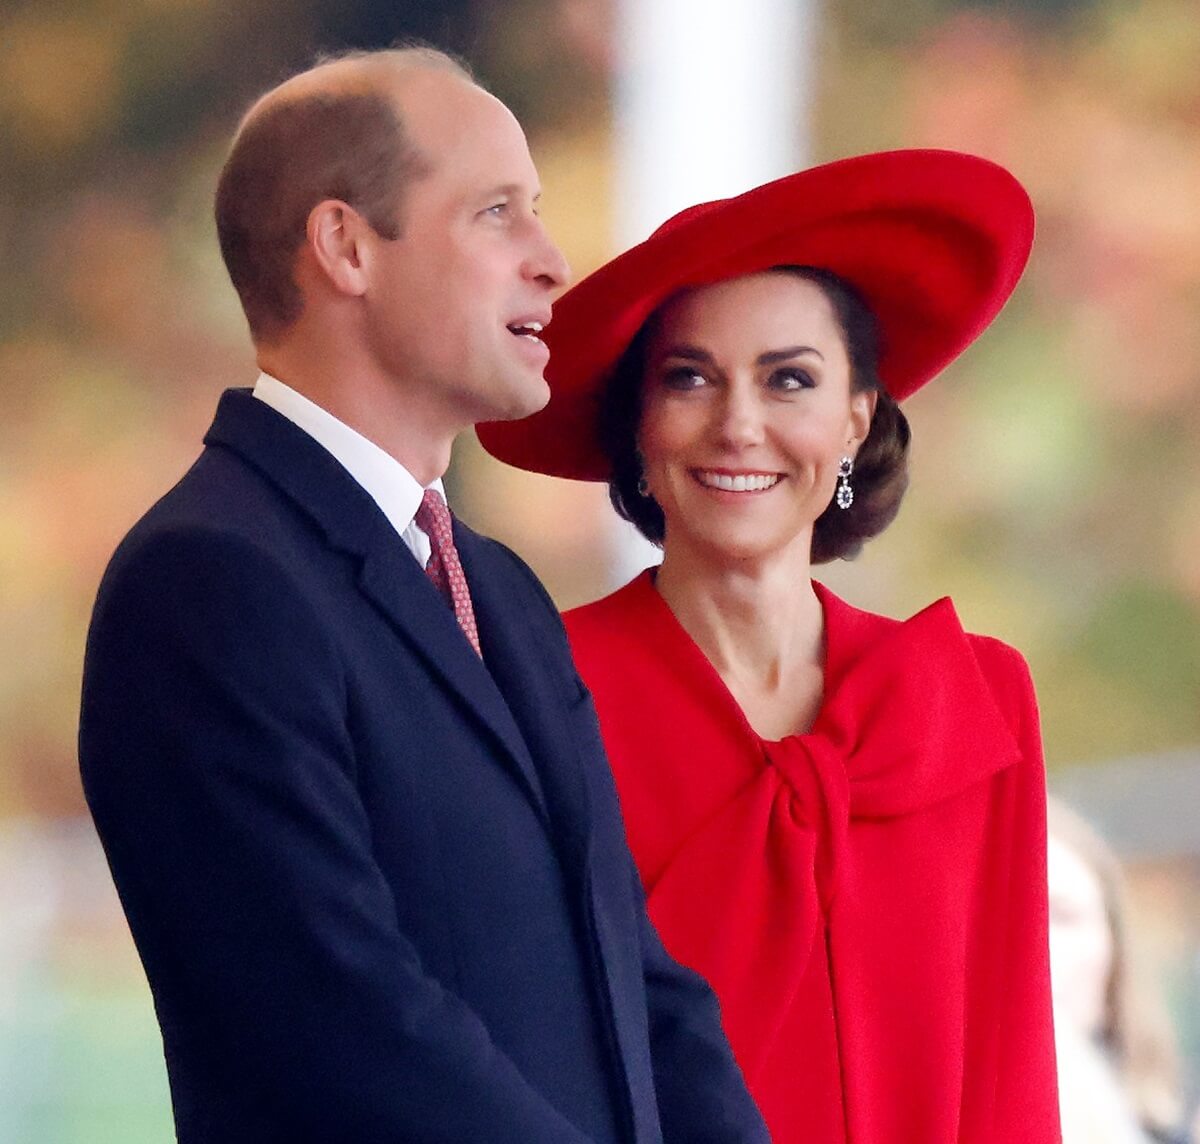 Prince William and Kate Middleton attend a ceremonial welcome at Horse Guards Parade for the president and first lady of the Republic of Korea